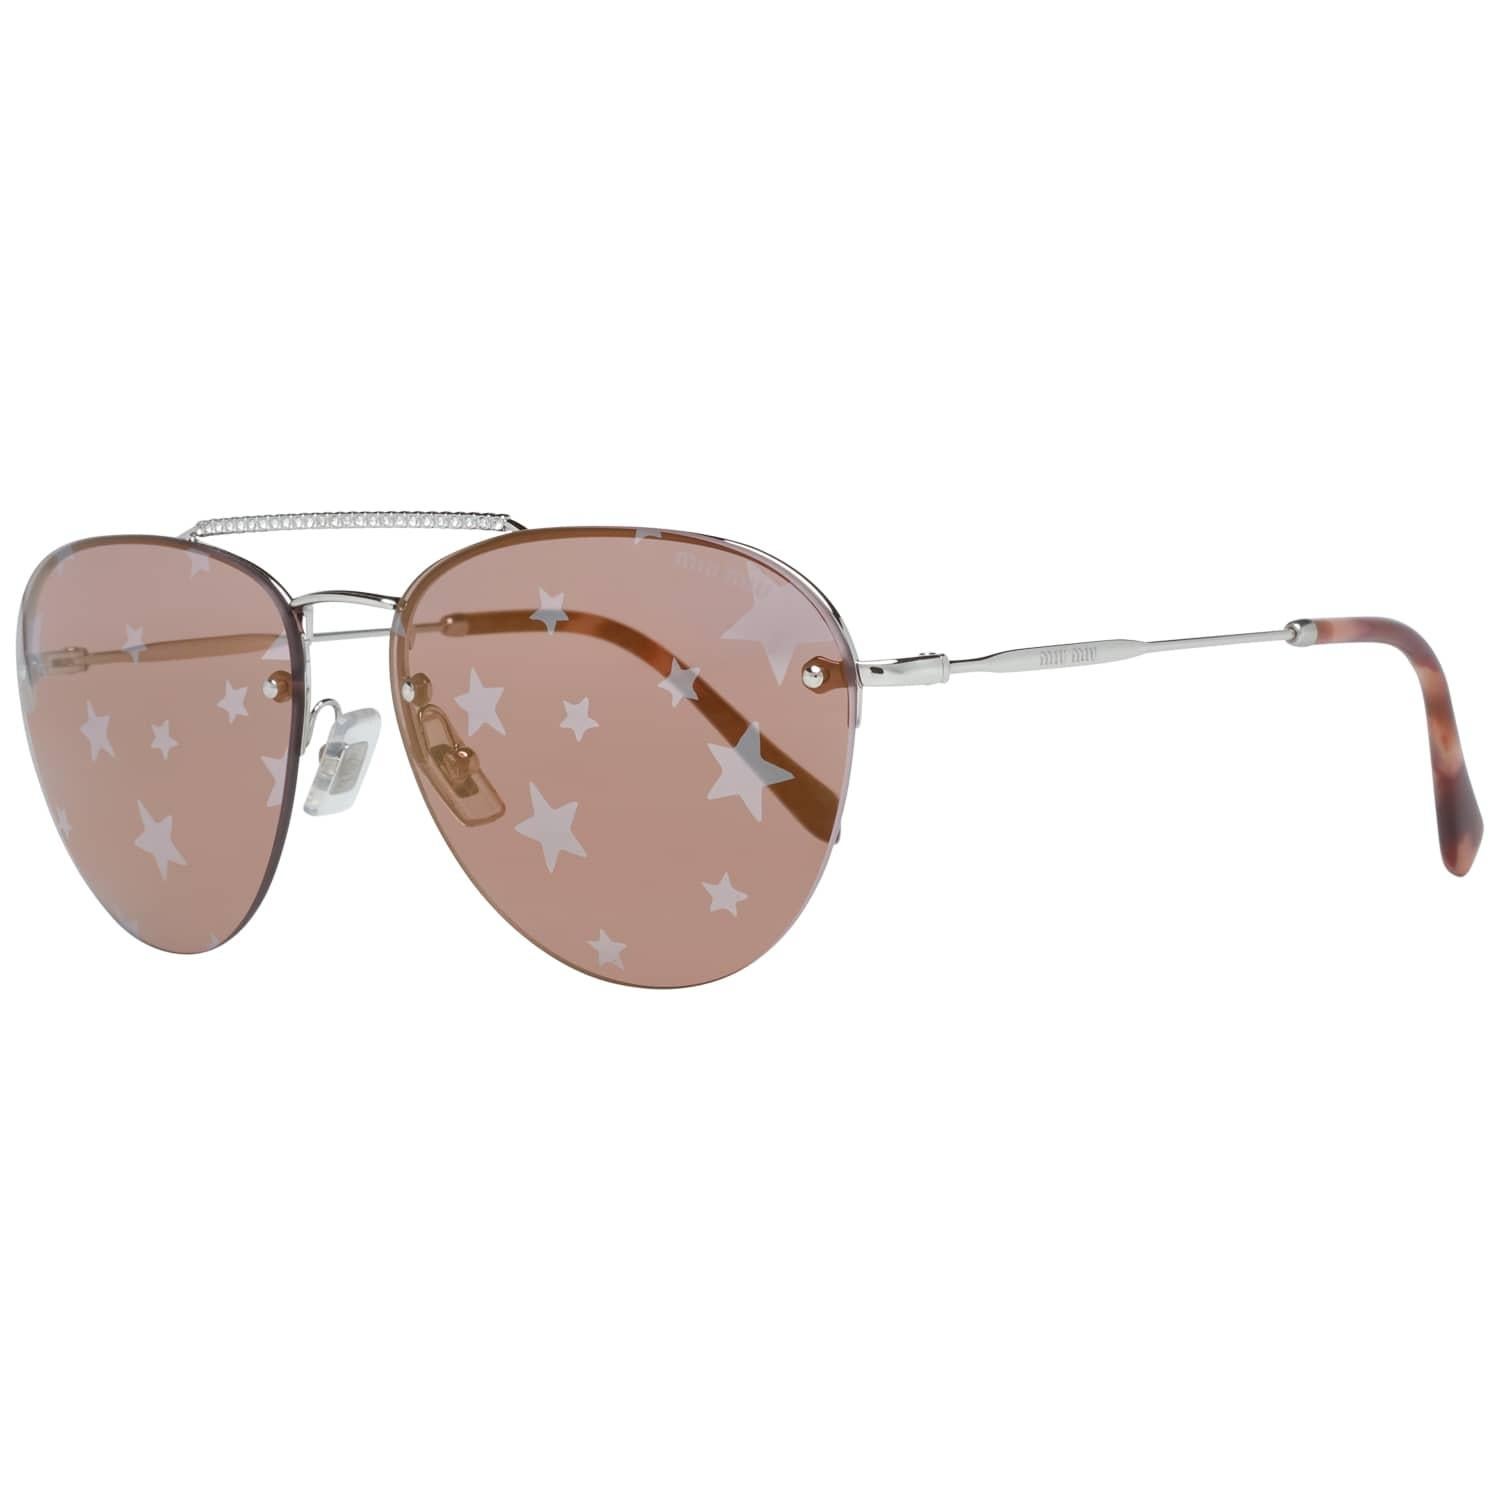 Details

MATERIAL: Metal

COLOR: Silver

MODEL: MU54US 1BC19559

GENDER: Women

COUNTRY OF MANUFACTURE: Italy

TYPE: Sunglasses

ORIGINAL CASE?: Yes

STYLE: Aviator

OCCASION: Casual

FEATURES: Lightweight

LENS COLOR: Burgundy

LENS TECHNOLOGY: